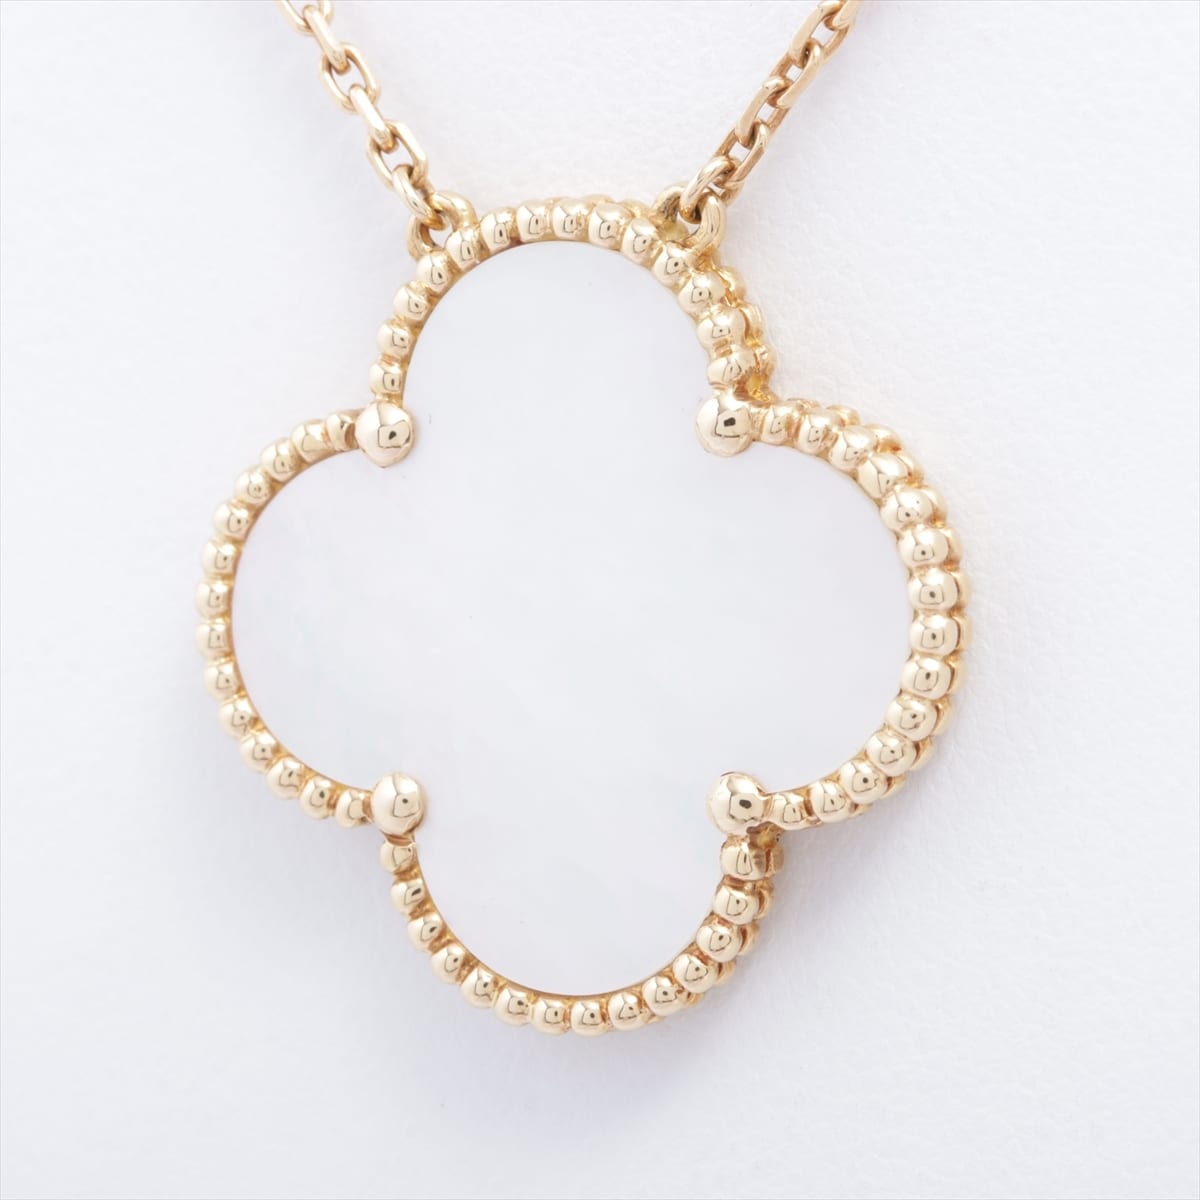 Van Cleef & Arpels Magic Alhambra shells Necklace 750(YG) 10.5g Limited to the 100th anniversary